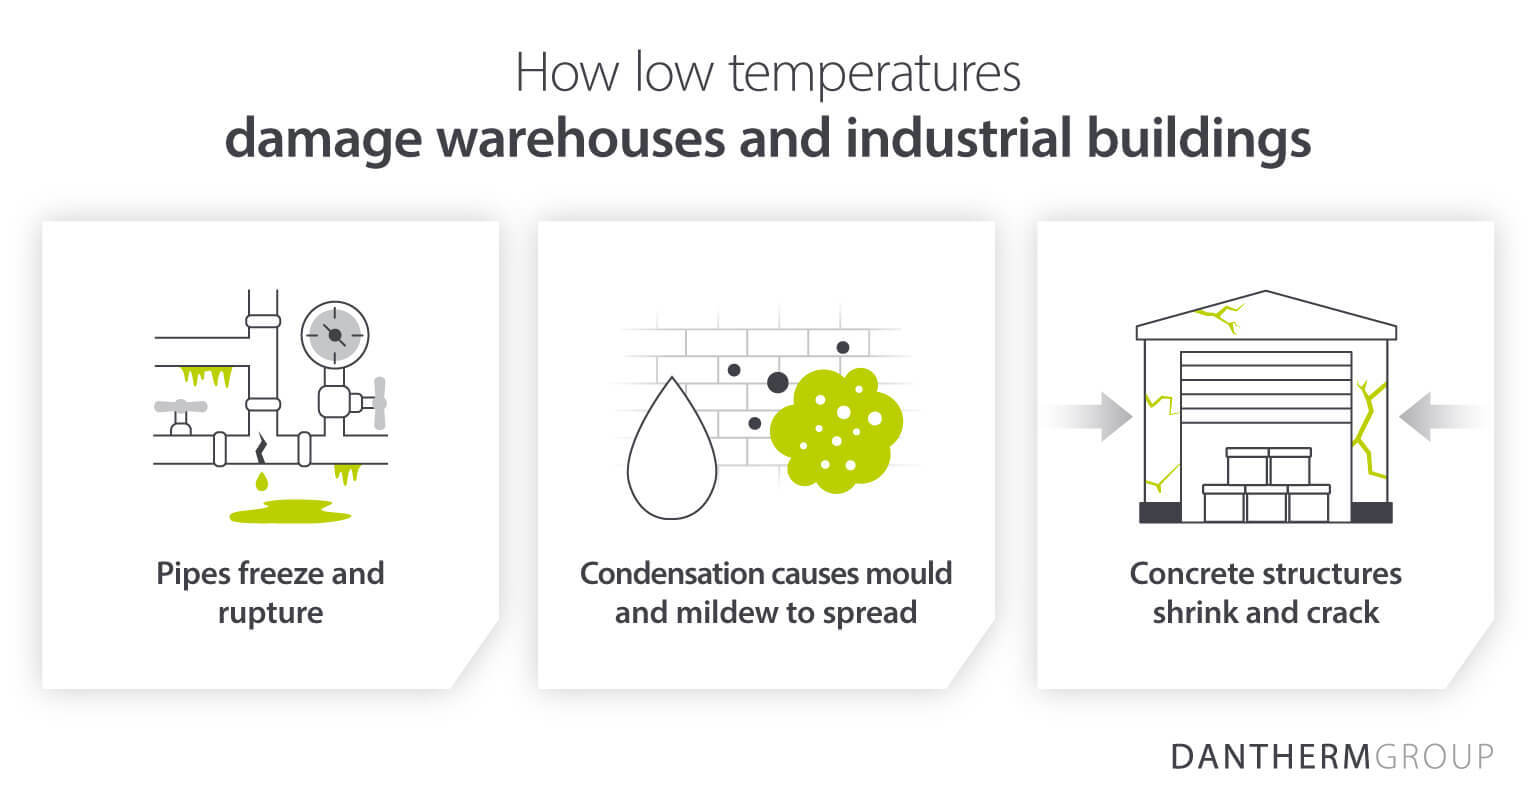 How low temperatures cause damage to warehouses and industrial buildings